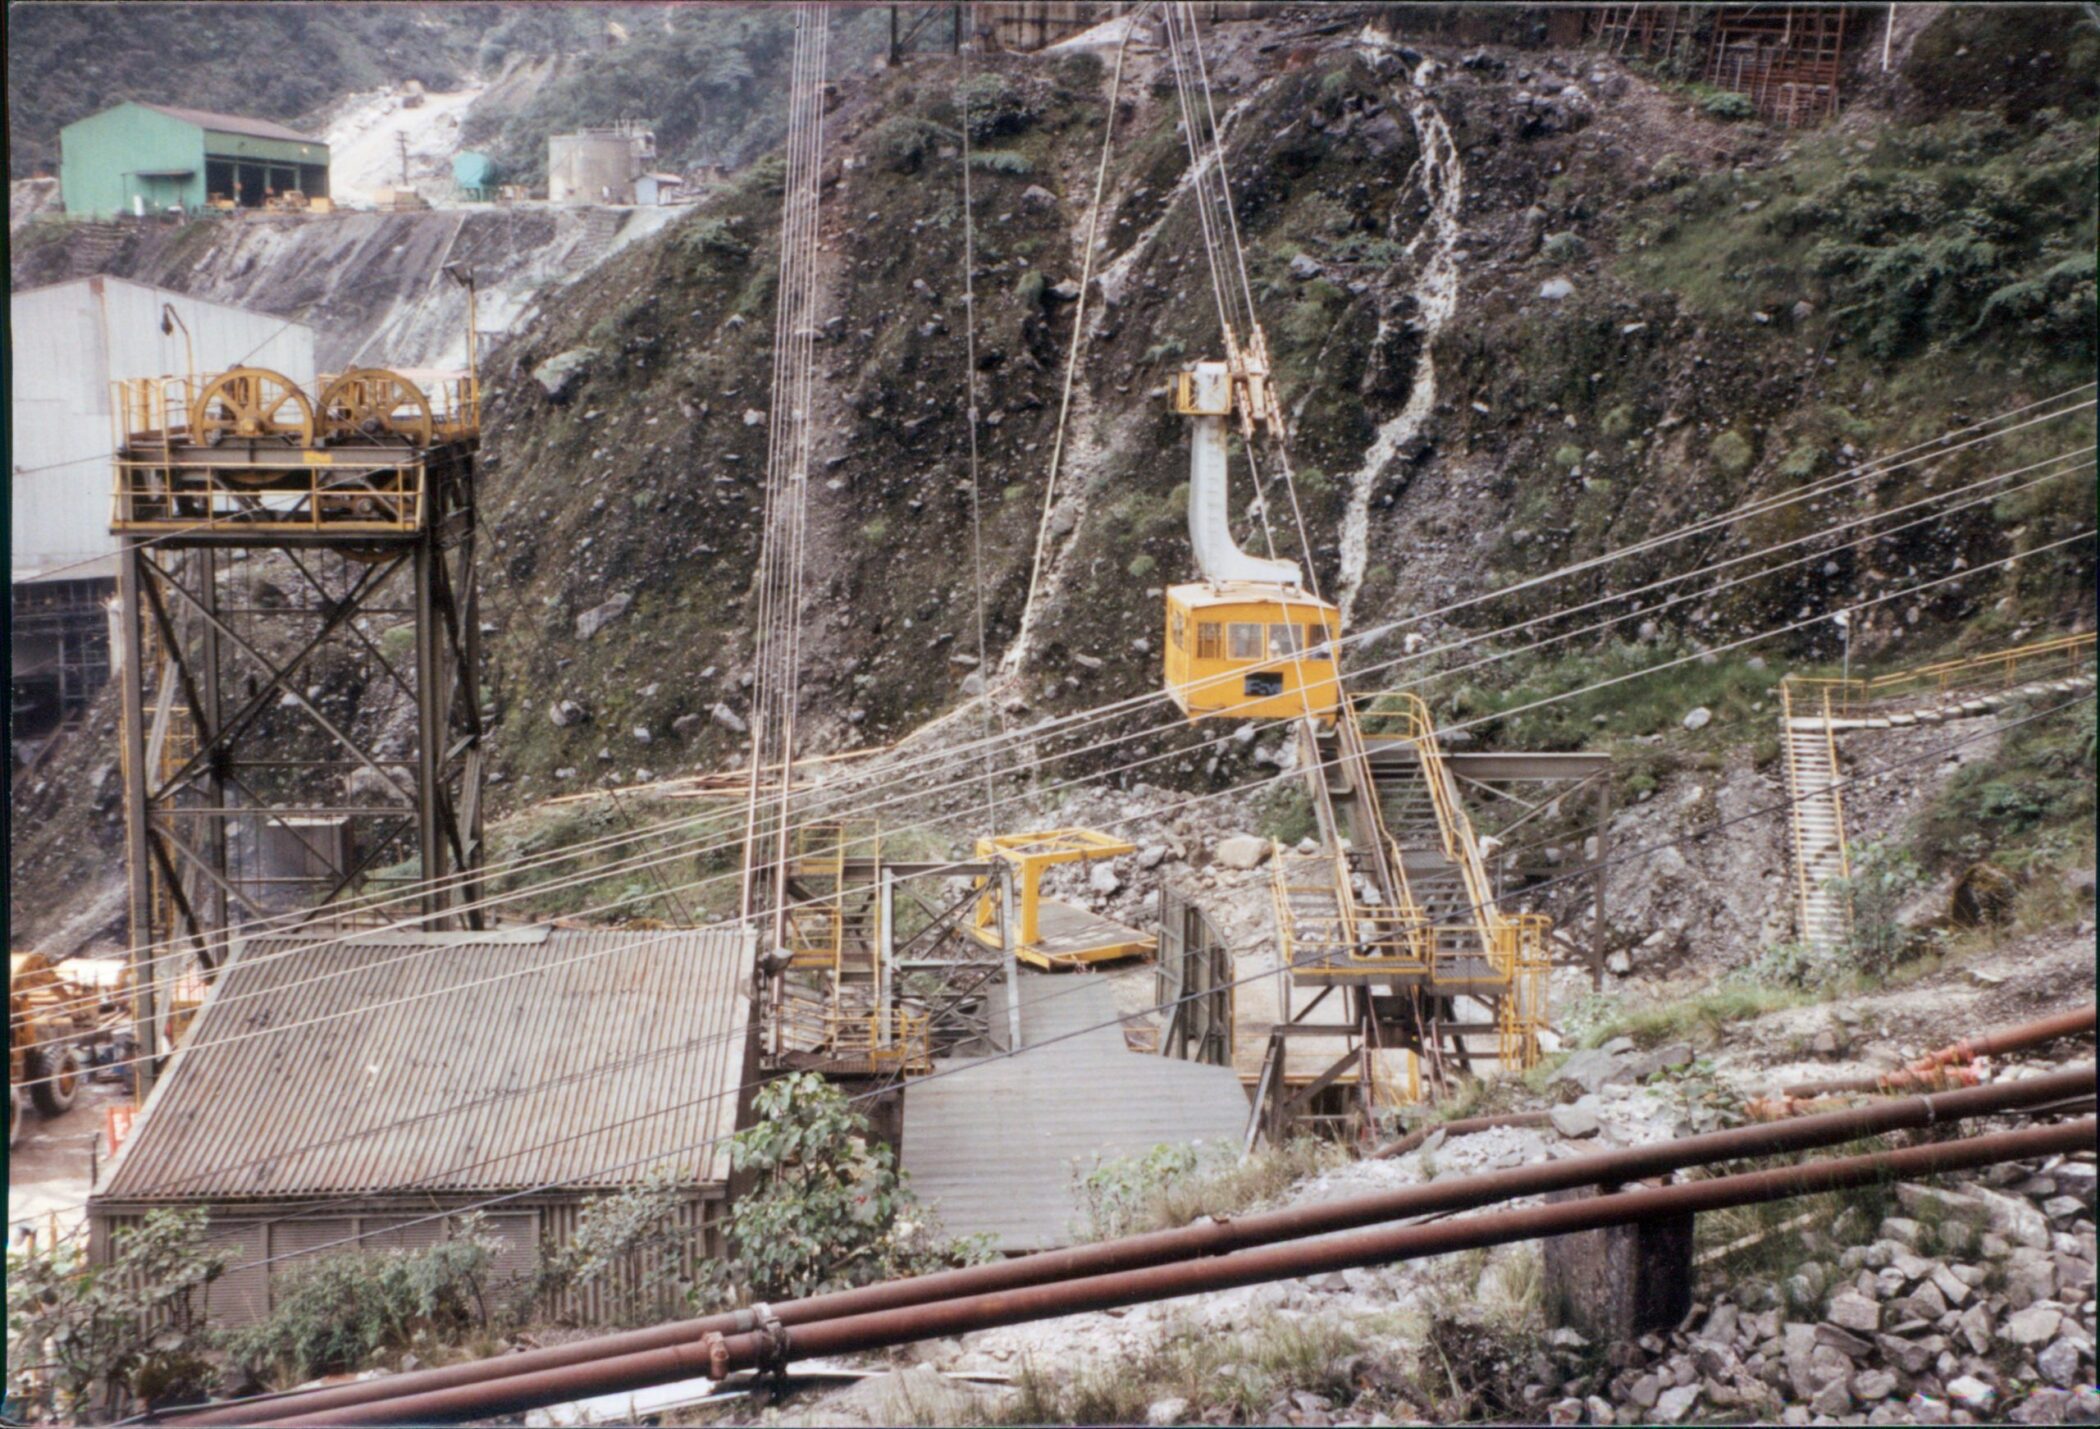 Cable cars going down a mountain